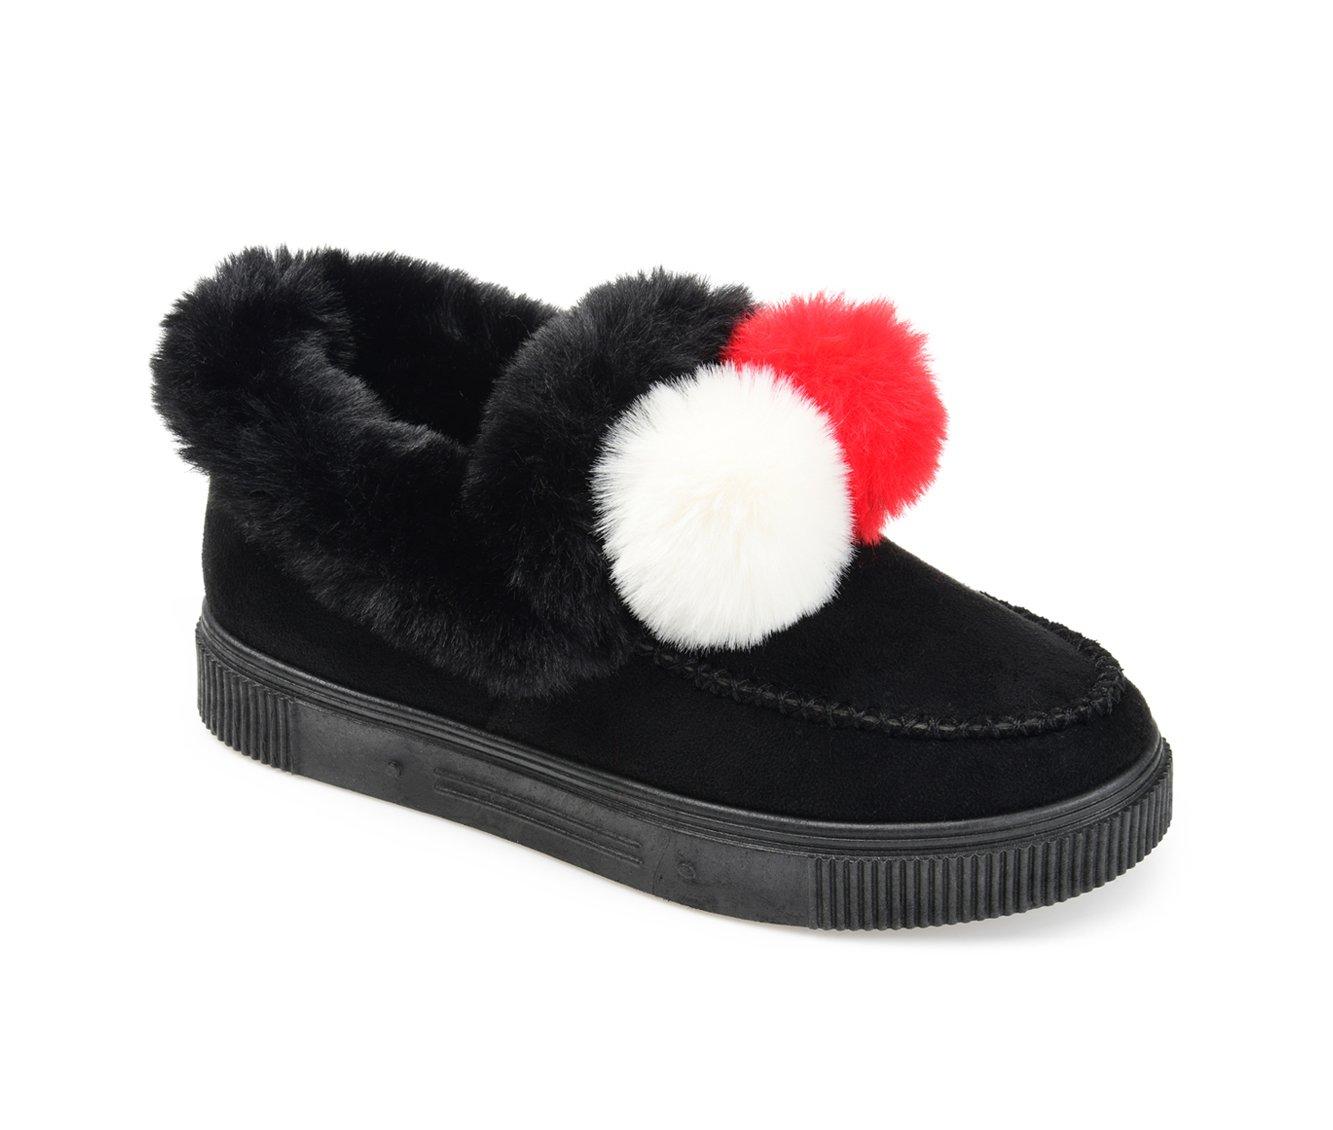 Women's Journee Collection Sunset Winter Moccasins